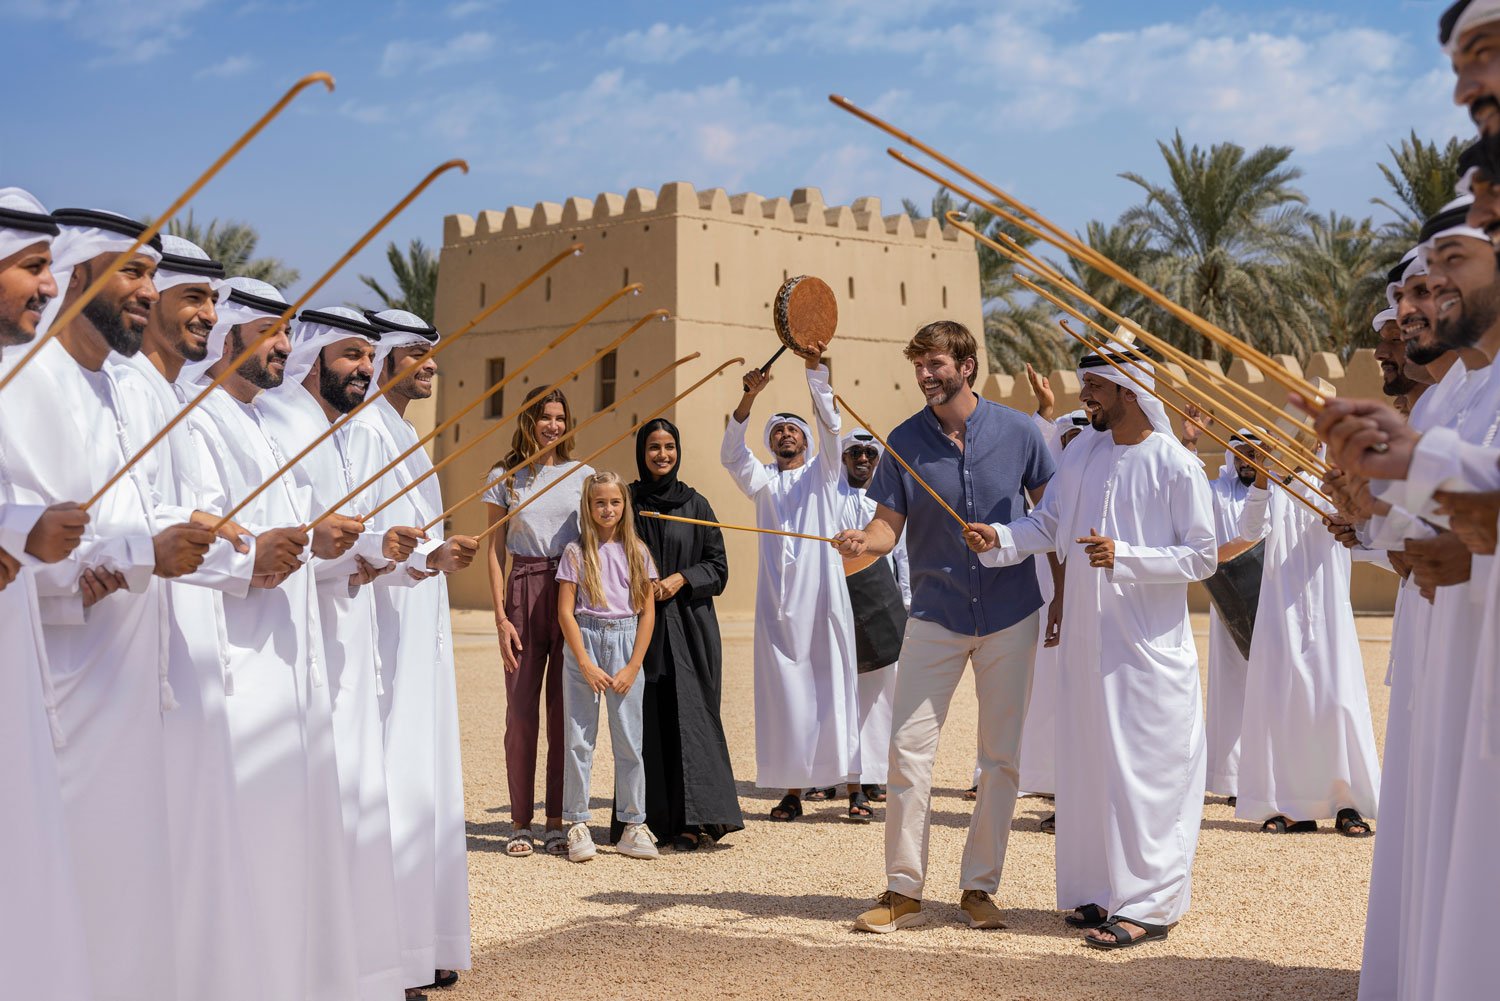 9 ways to discover Abu Dhabi's history